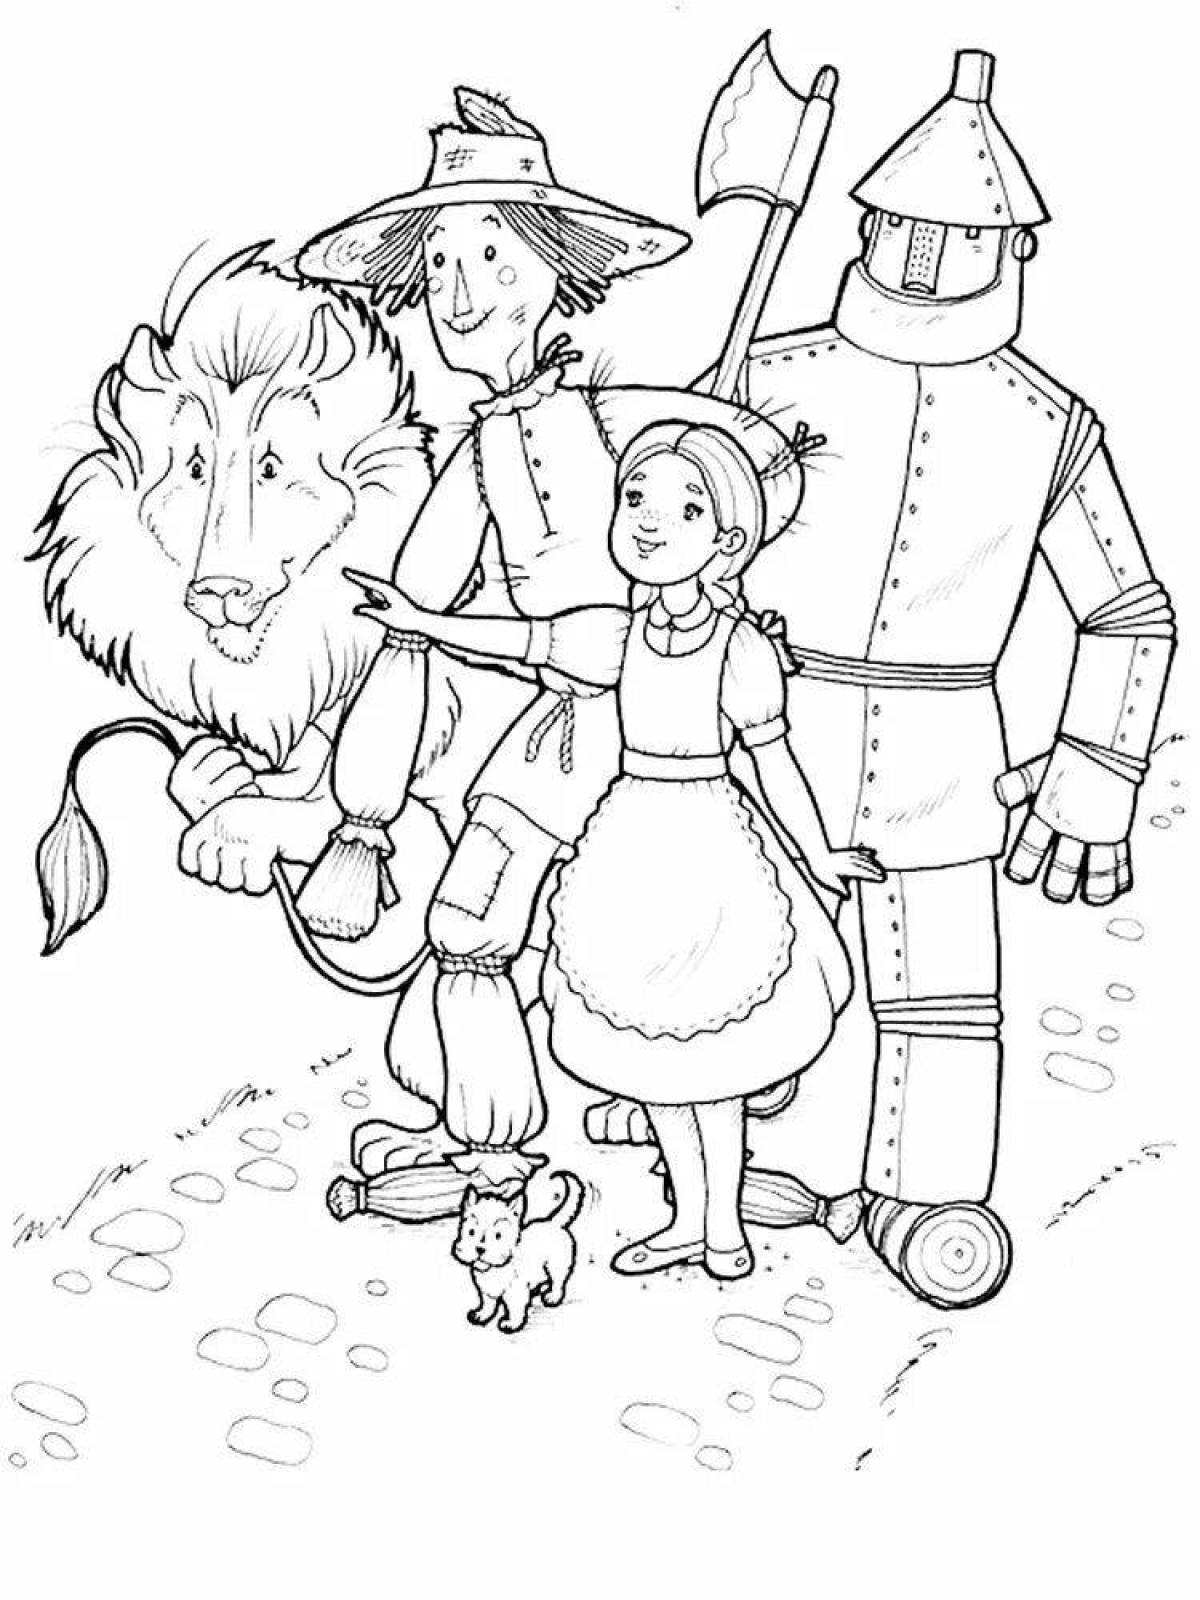 Coloring page bright wizard of oz